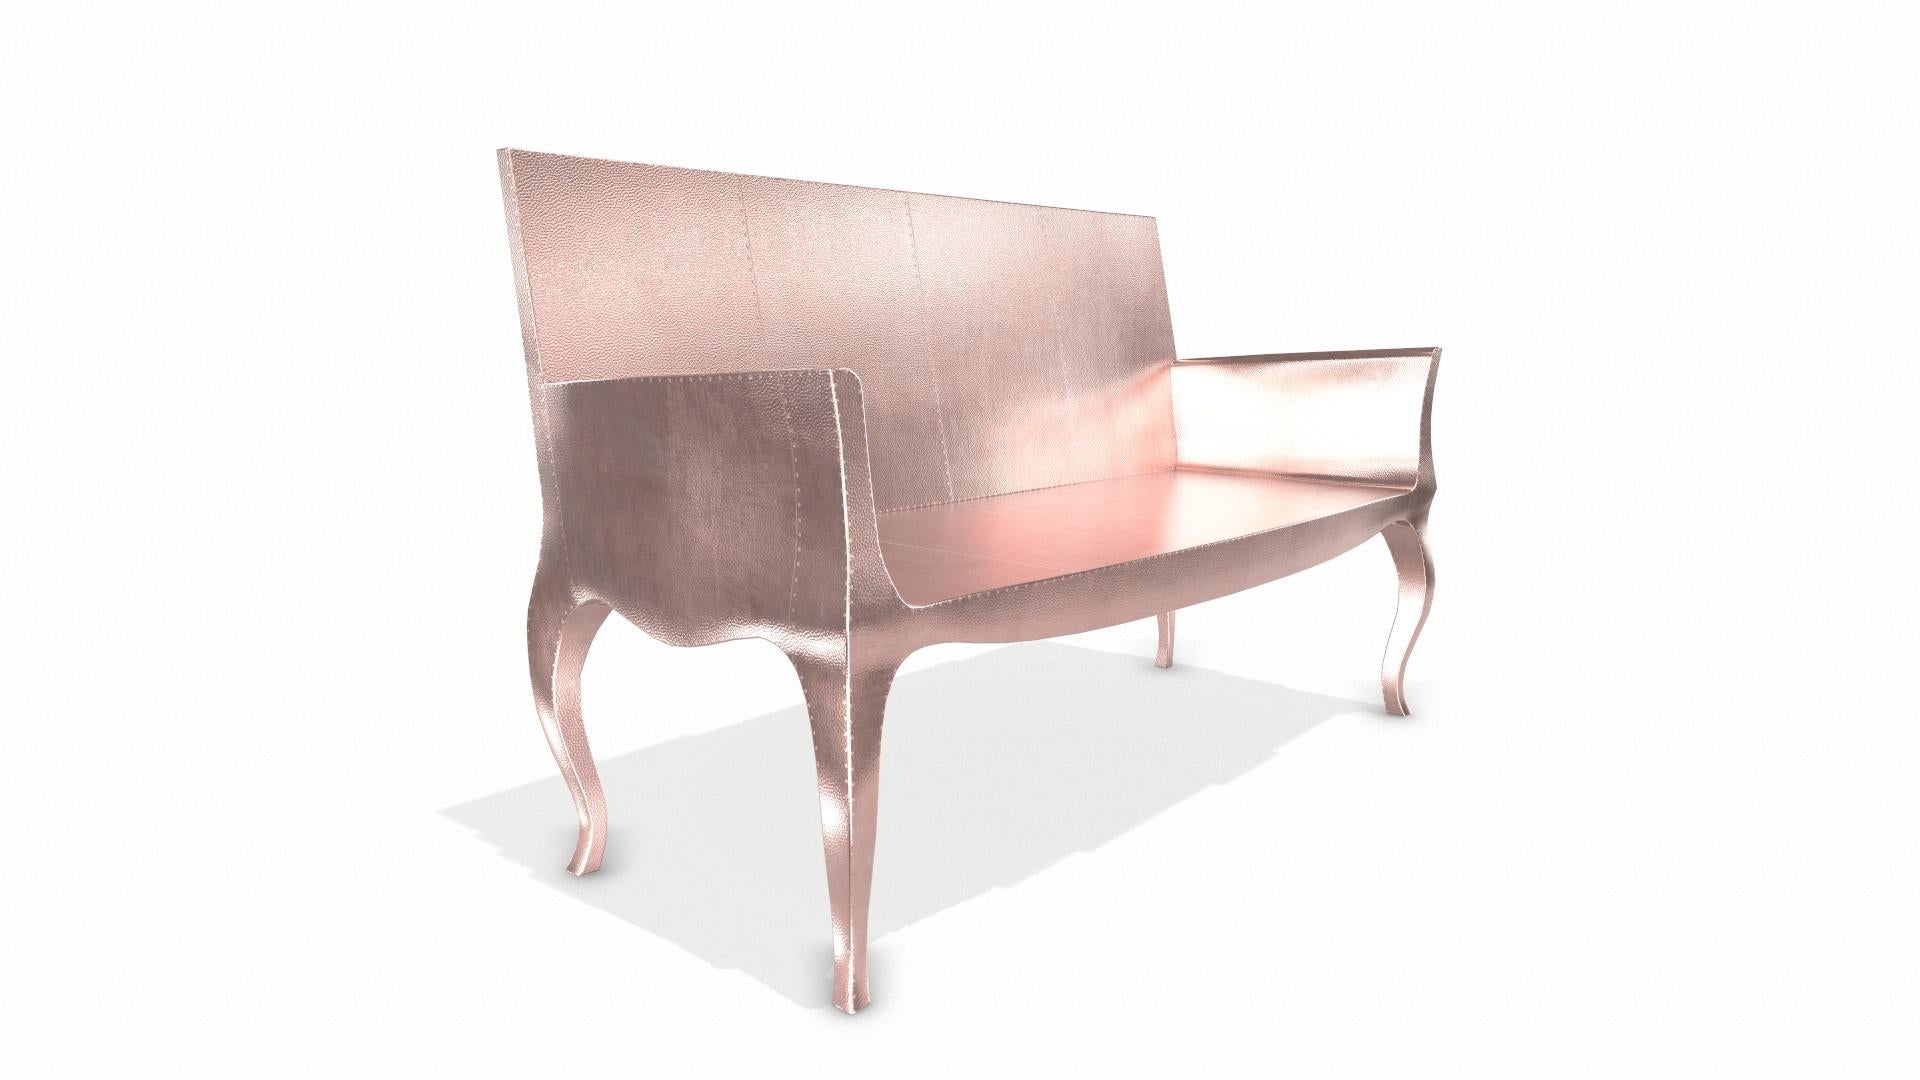 Louise Settee Art Deco Daybeds in Mid. Hammered Copper by Paul Mathieu In New Condition For Sale In New York, NY